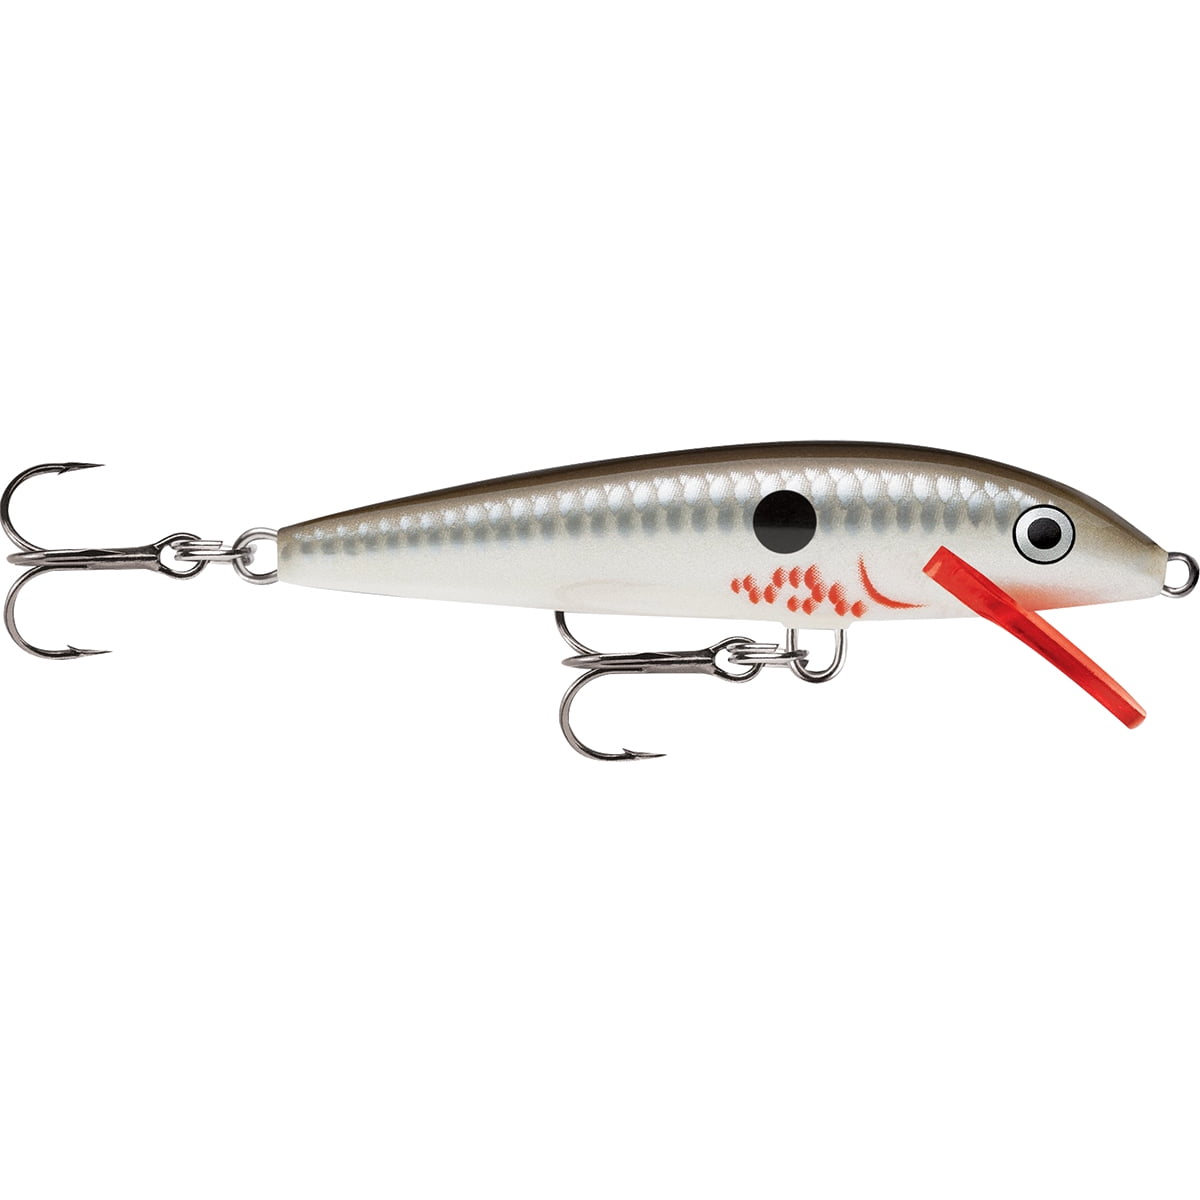 Rapala 7cm (4g) Jointed Floating Fishing Lure-Clown